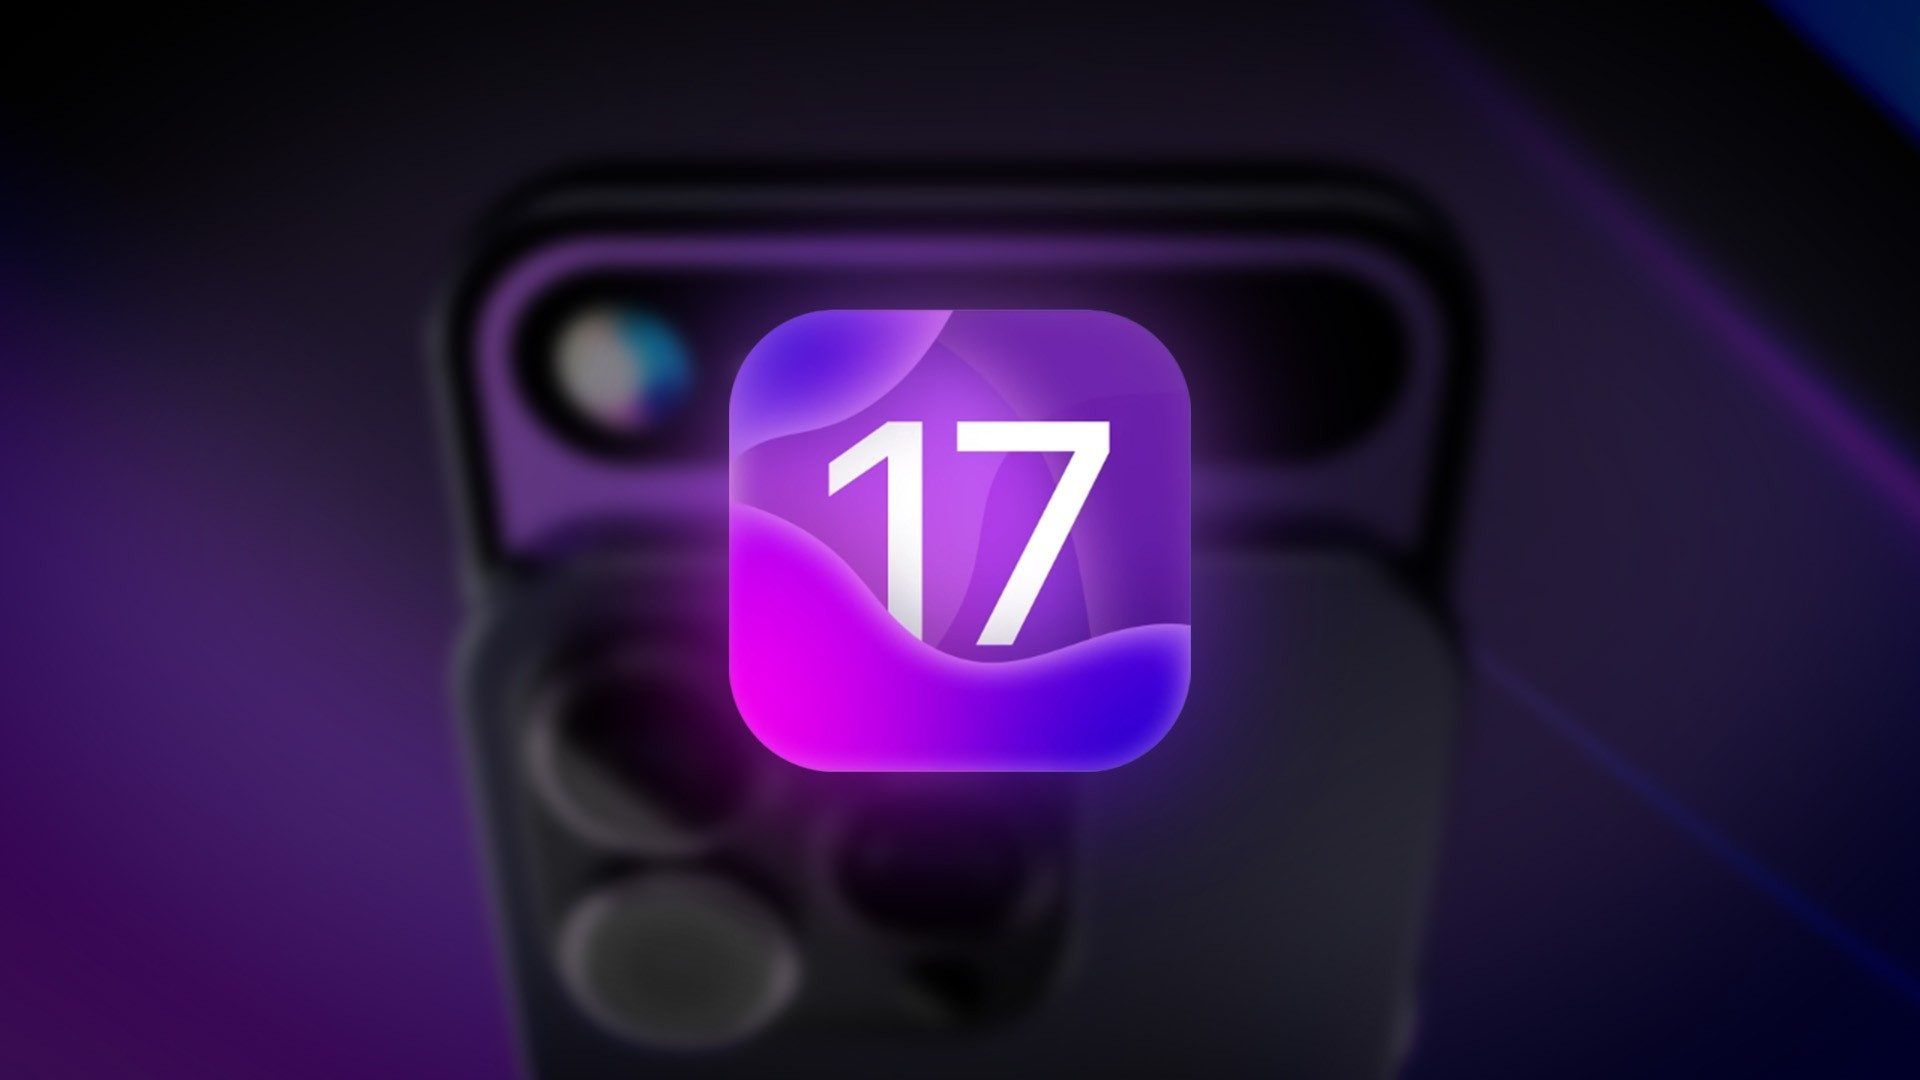 iOS 17: Supported devices, rumors, and release date